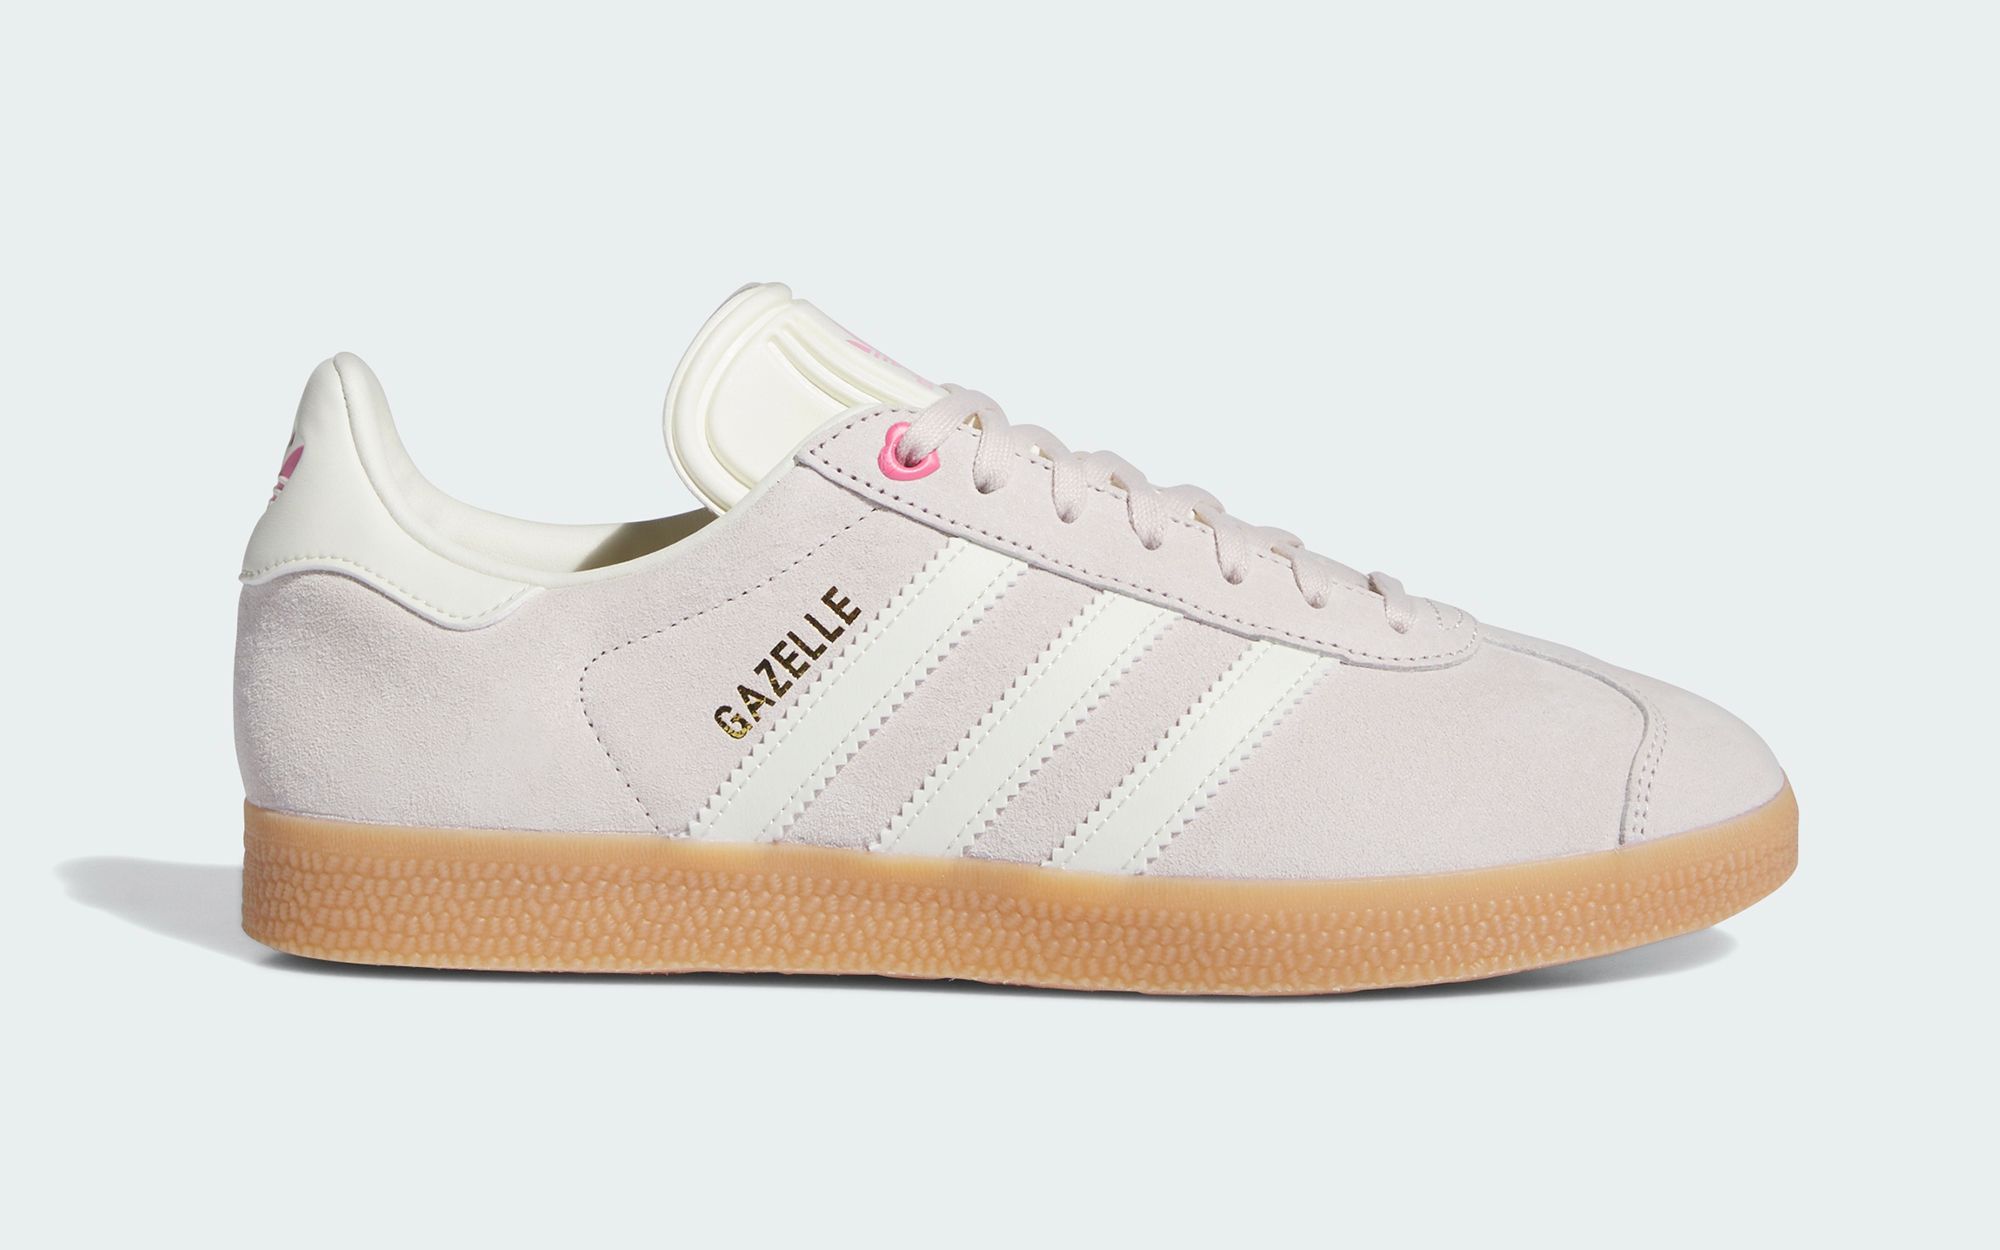 adidas gazelle pink and navy